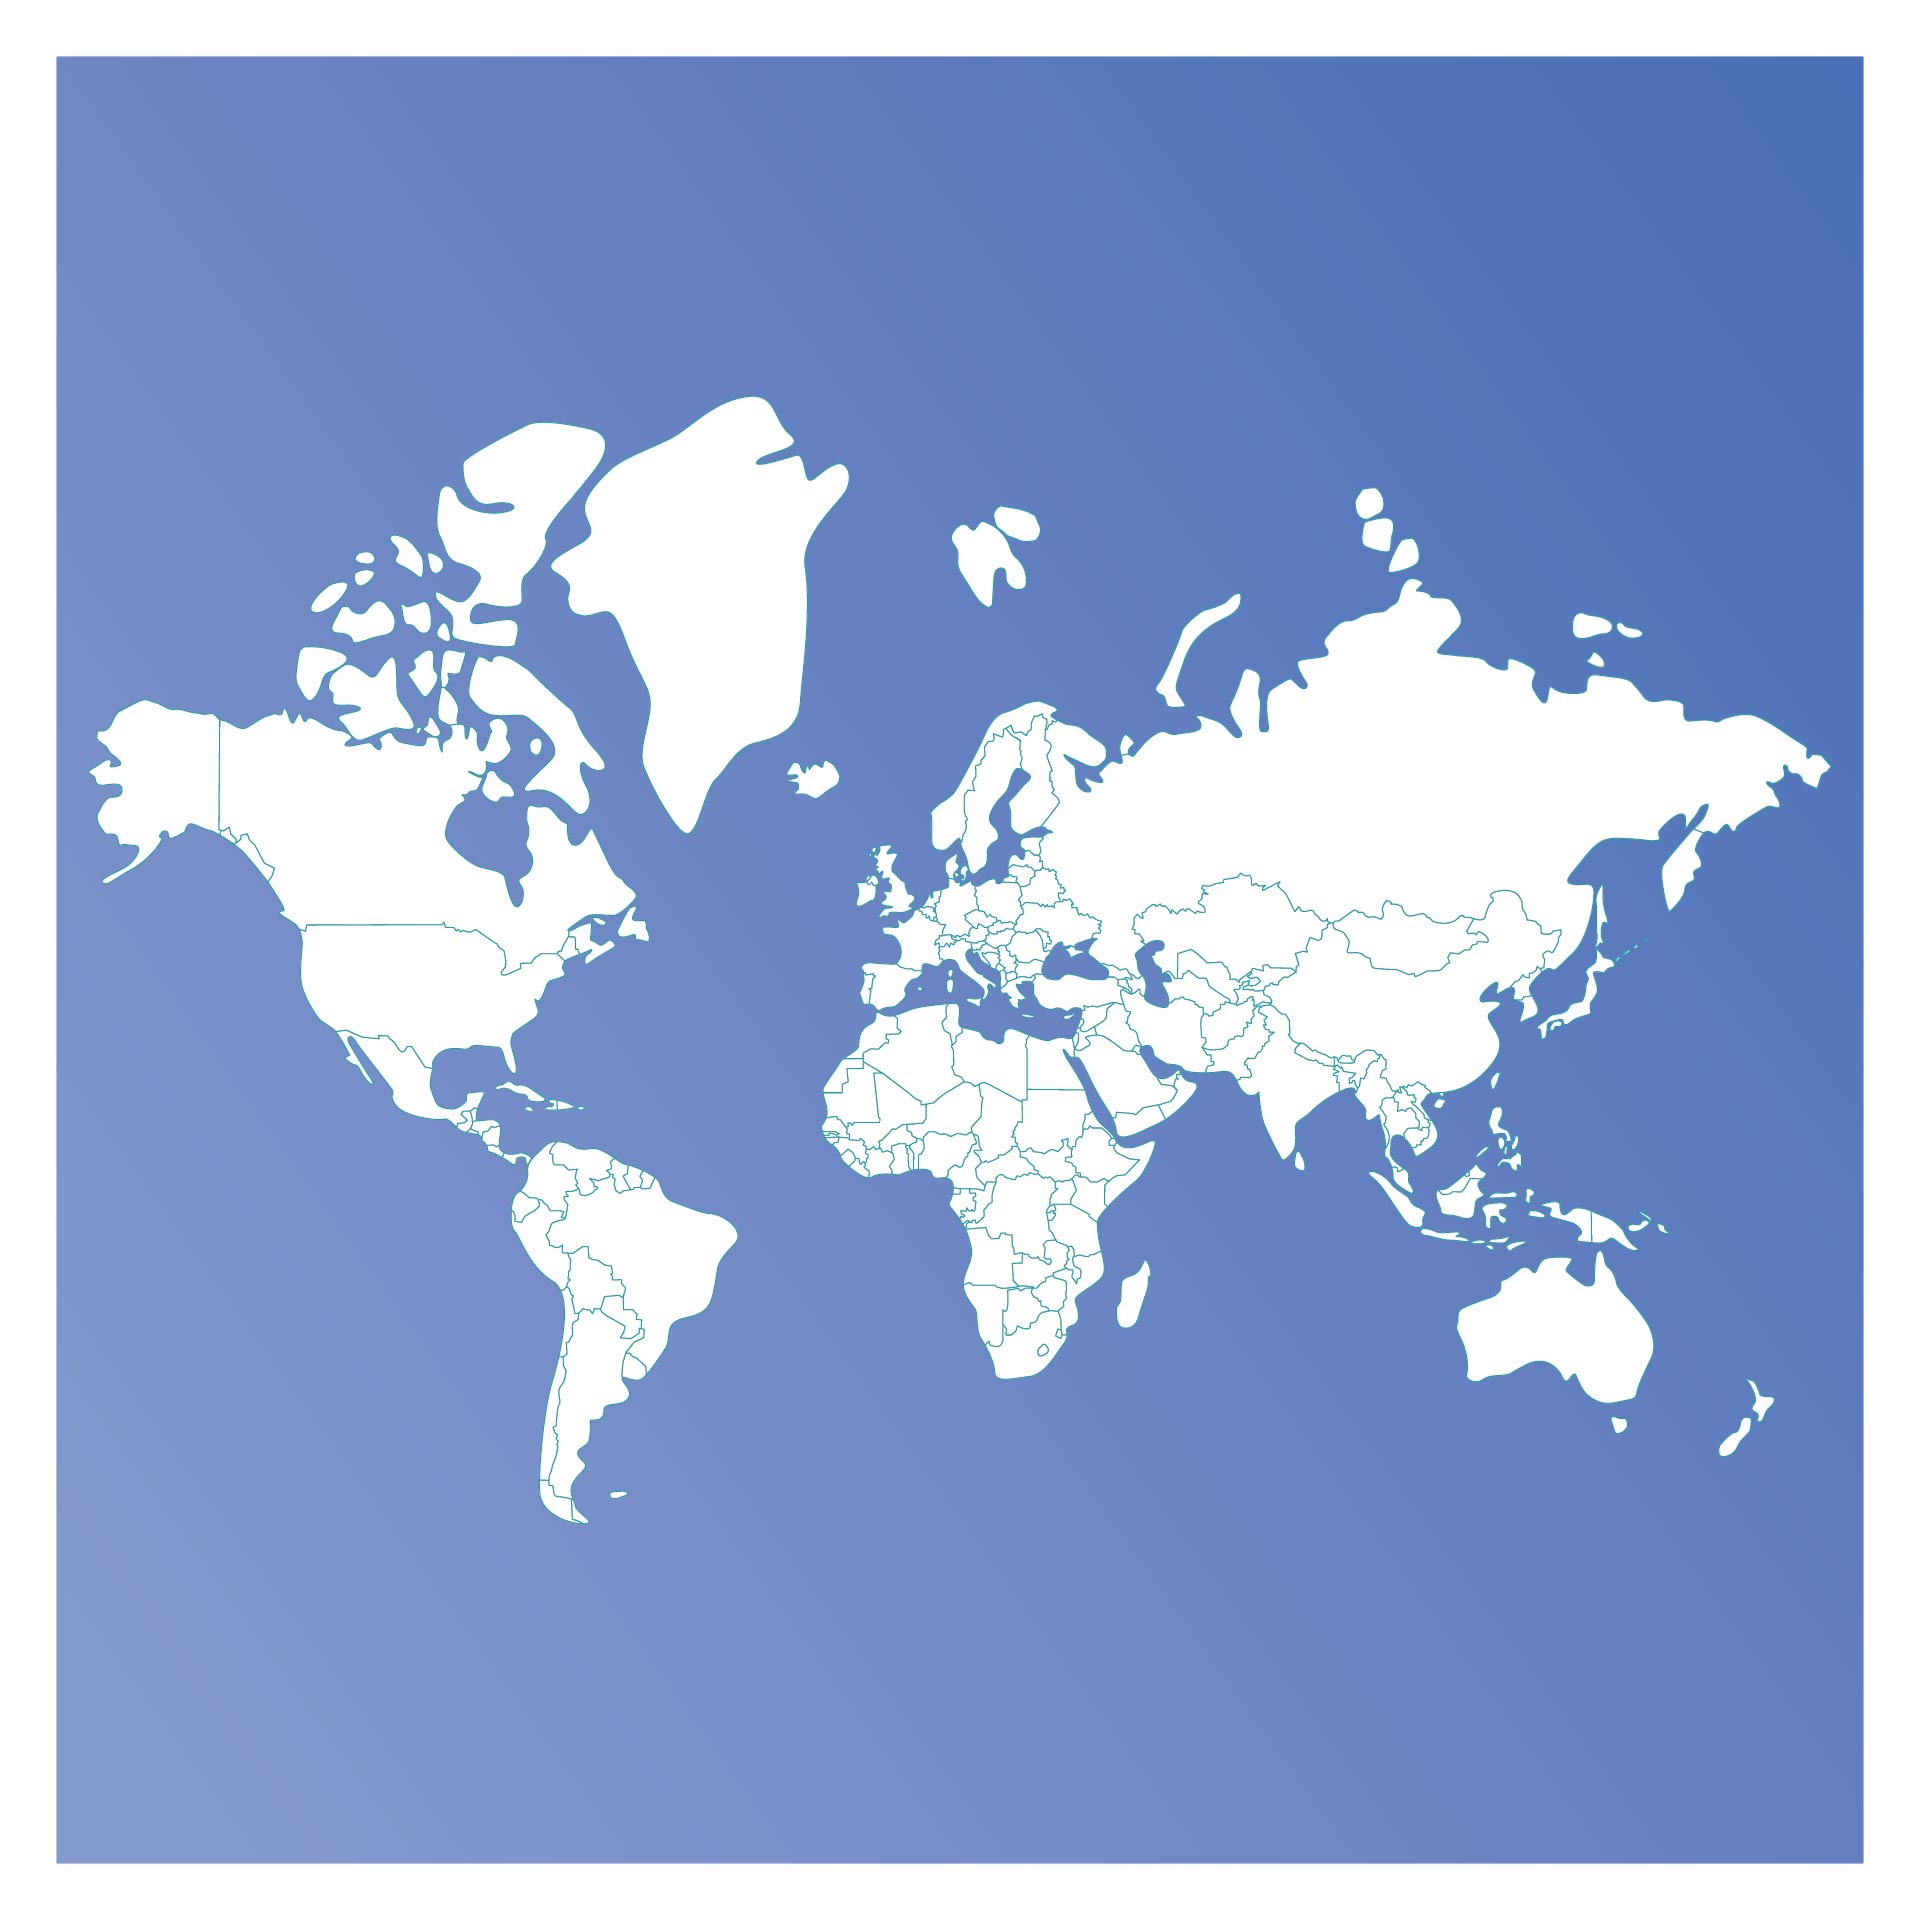 outline map of the world